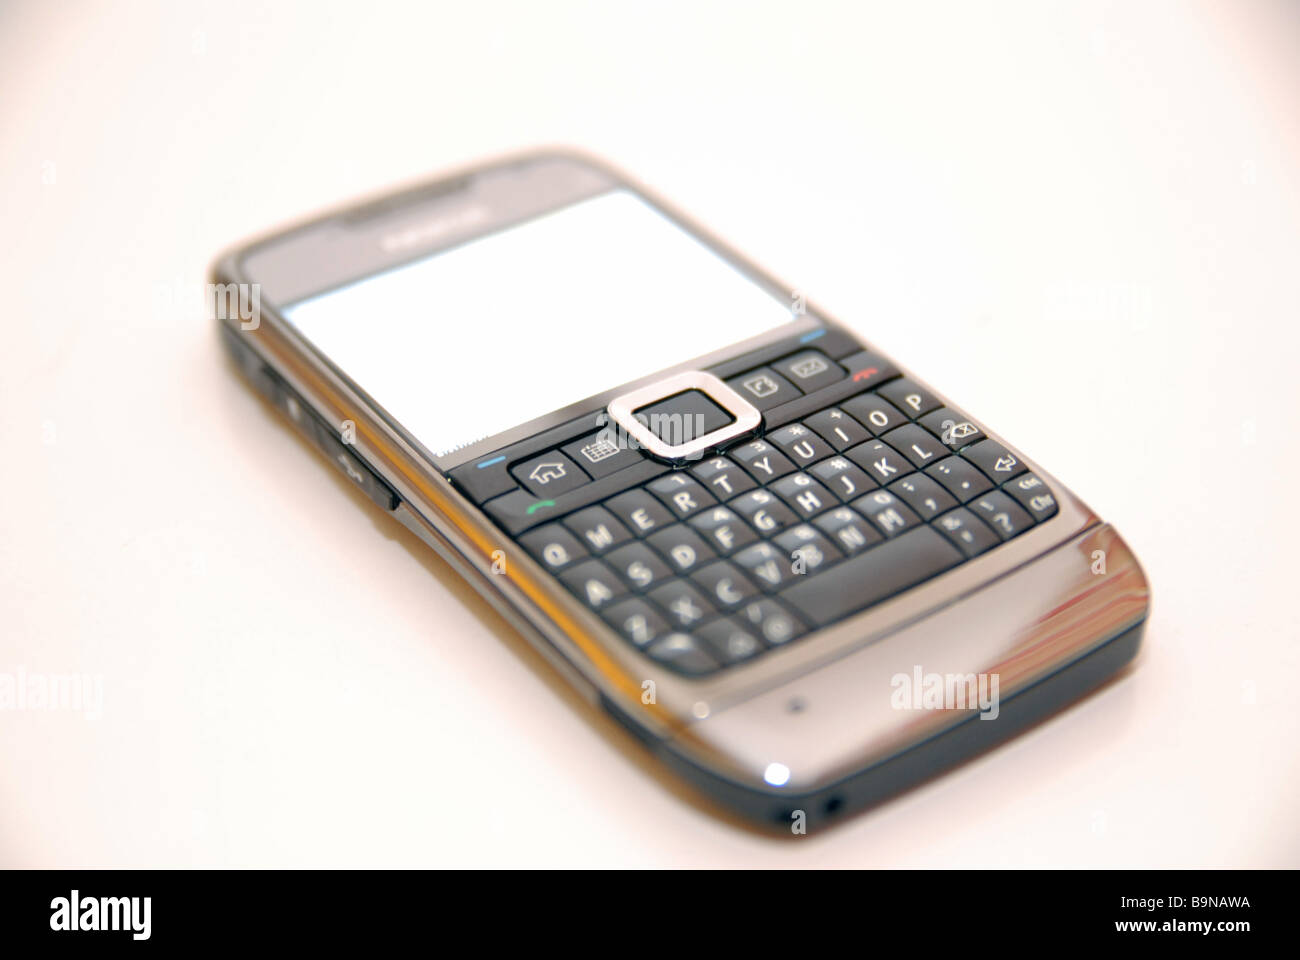 A Nokia mobile phone/device with full QWERTY keyboard Stock Photo - Alamy